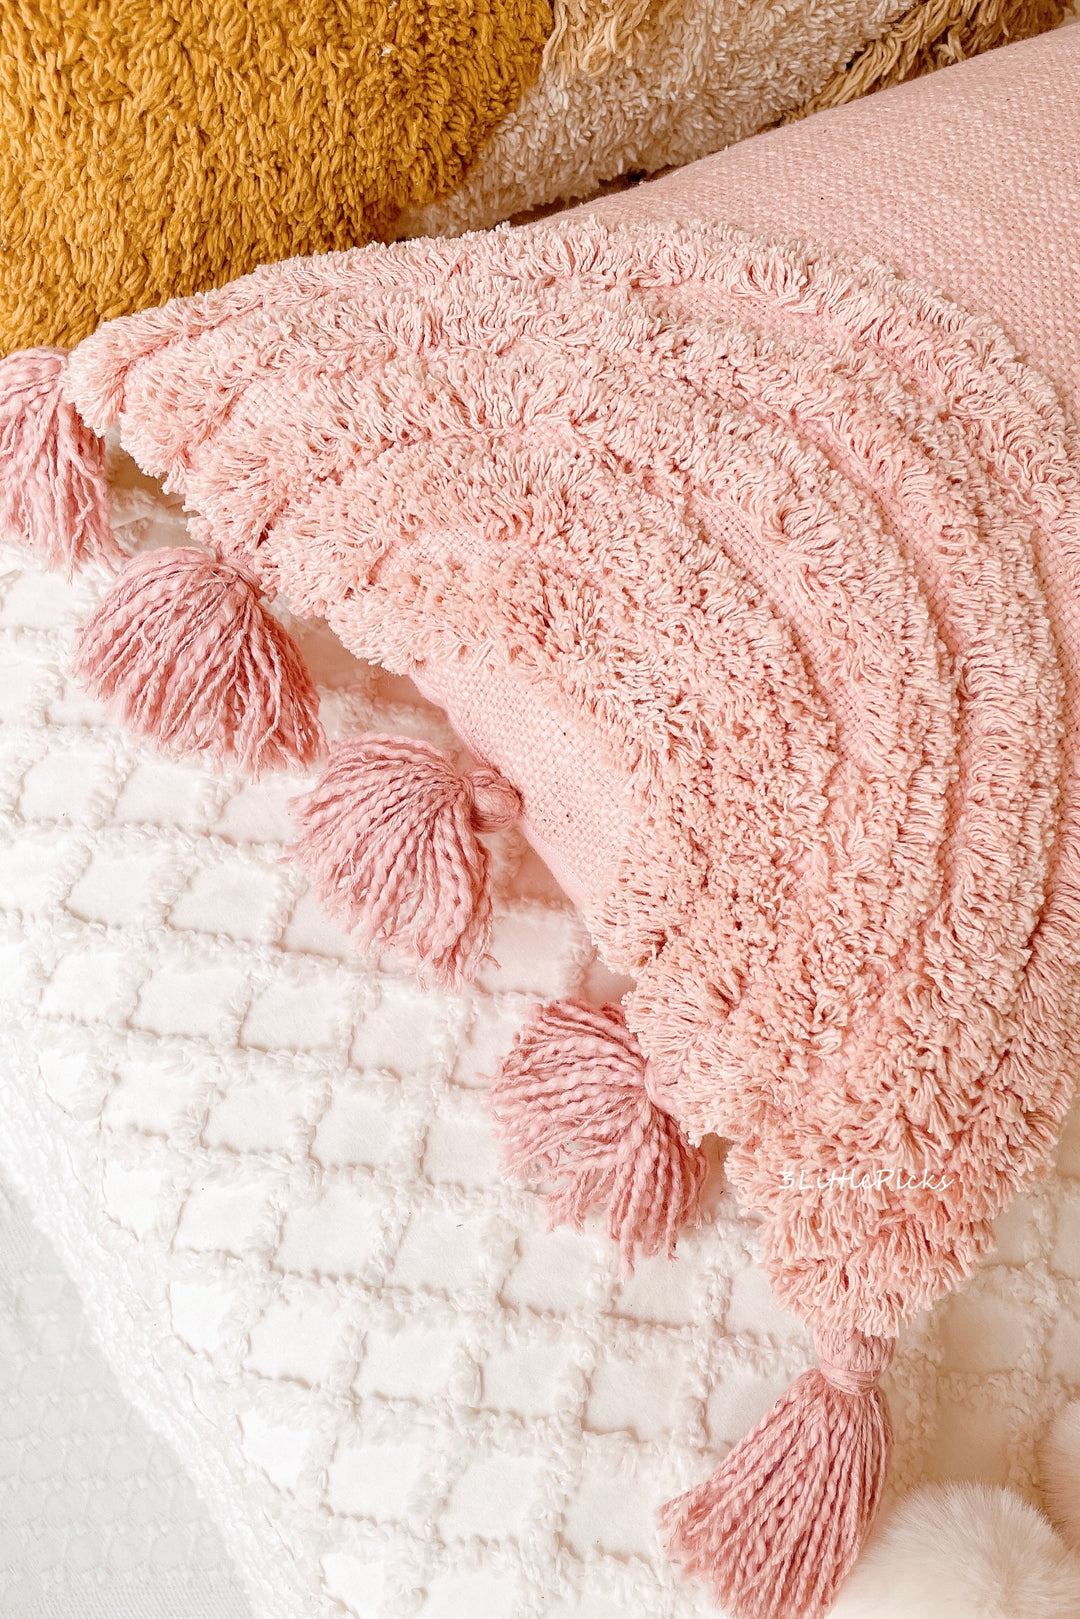 Dusty Pink Tufted Waist Cushion Cover with Tassels